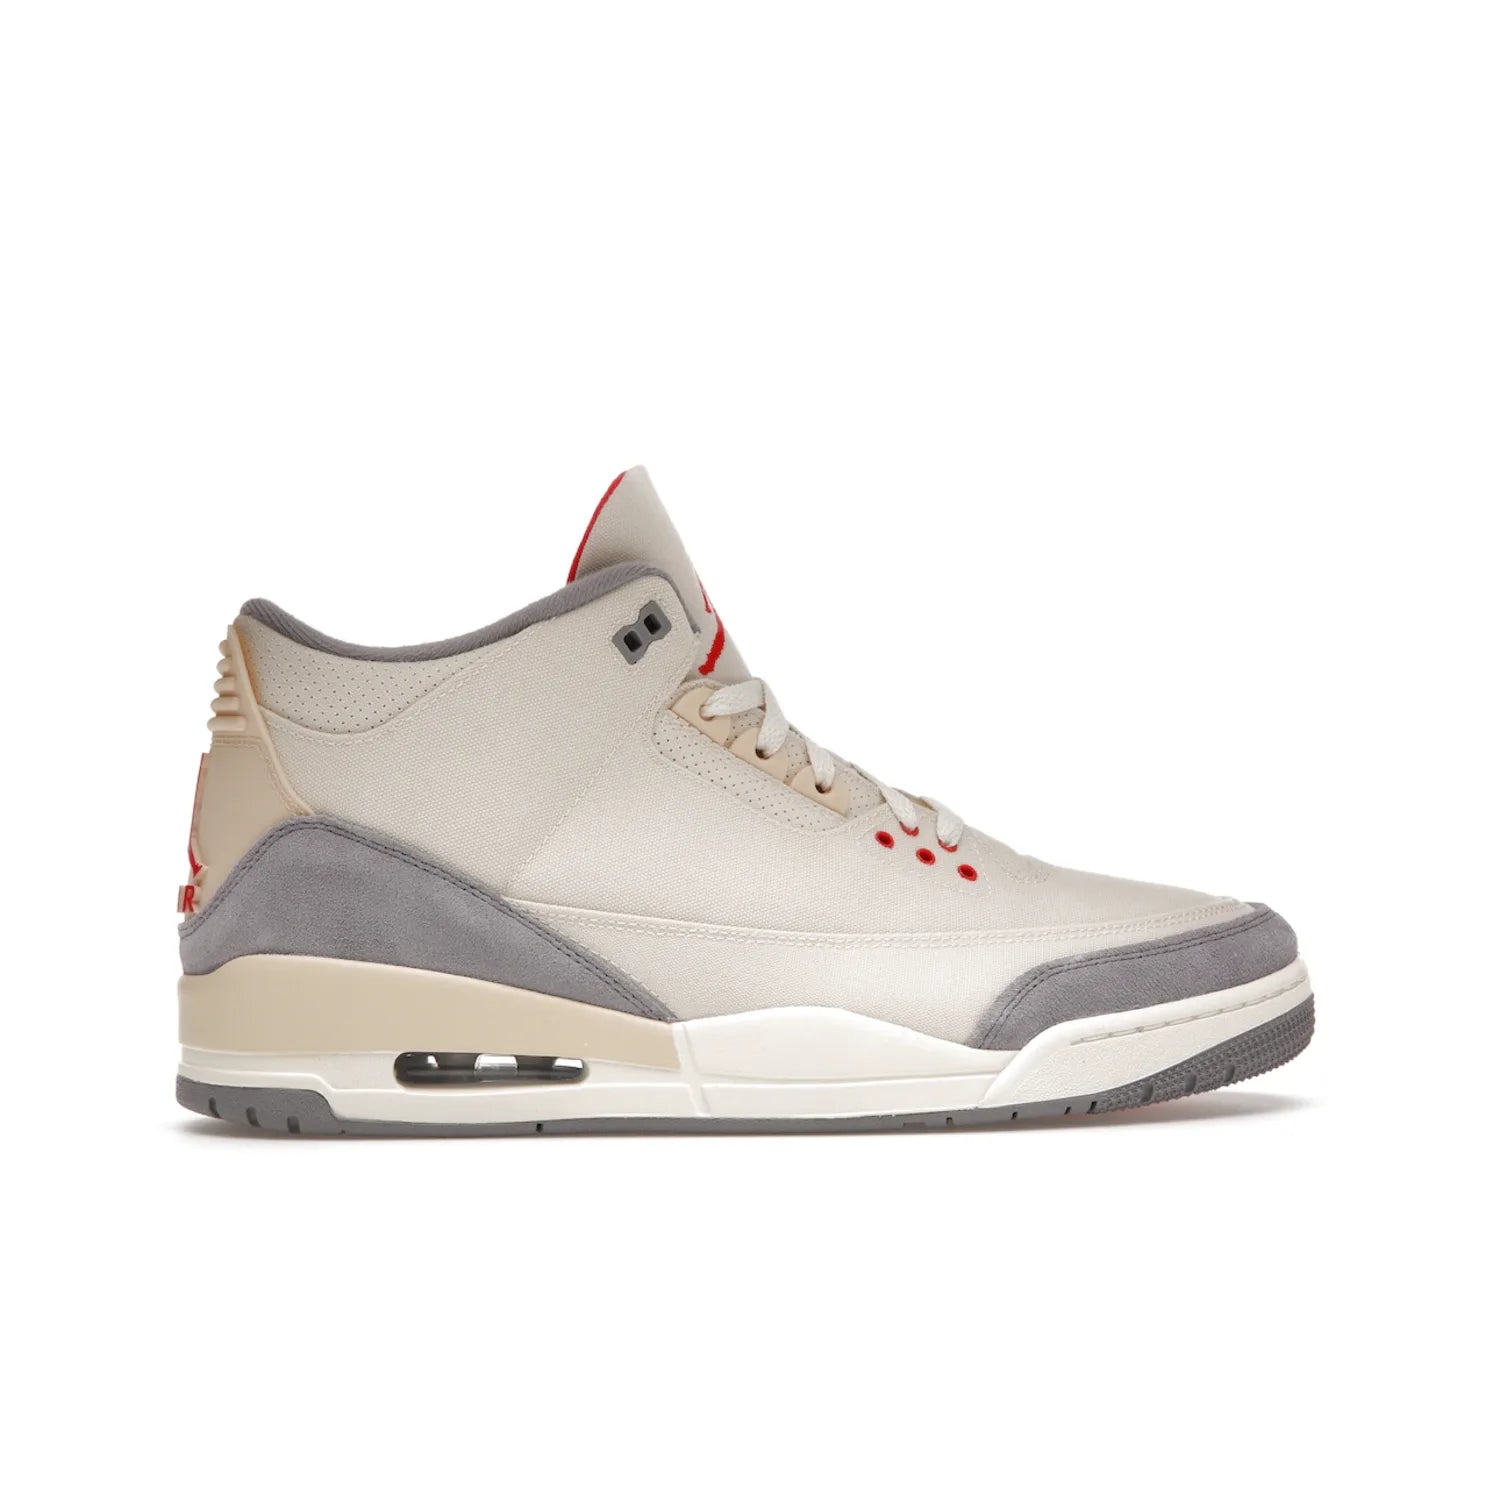 Jordan 3 Retro Muslin - Image 36 - Only at www.BallersClubKickz.com - Eye-catching Air Jordan 3 Retro Muslin in a neutral palette of grey, cream, and red. Featuring canvas upper, suede overlays and white/grey Air Max sole. Available in March 2022.